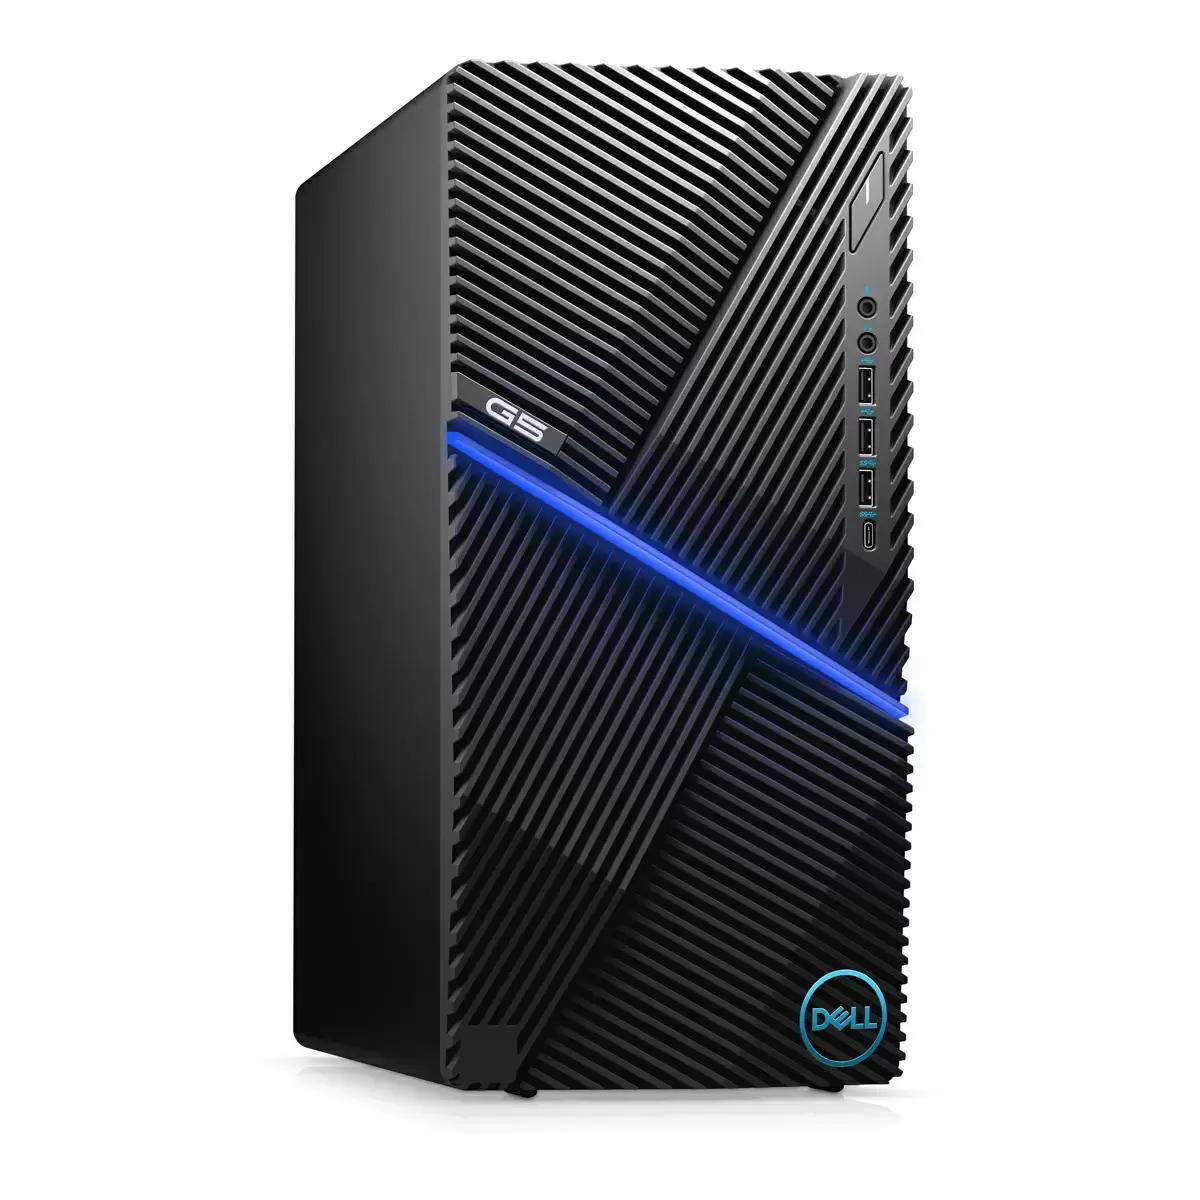 Dell G5 i5 16GB 512GB GTX 1660 Gaming Desktop Computer for $729.99 Shipped